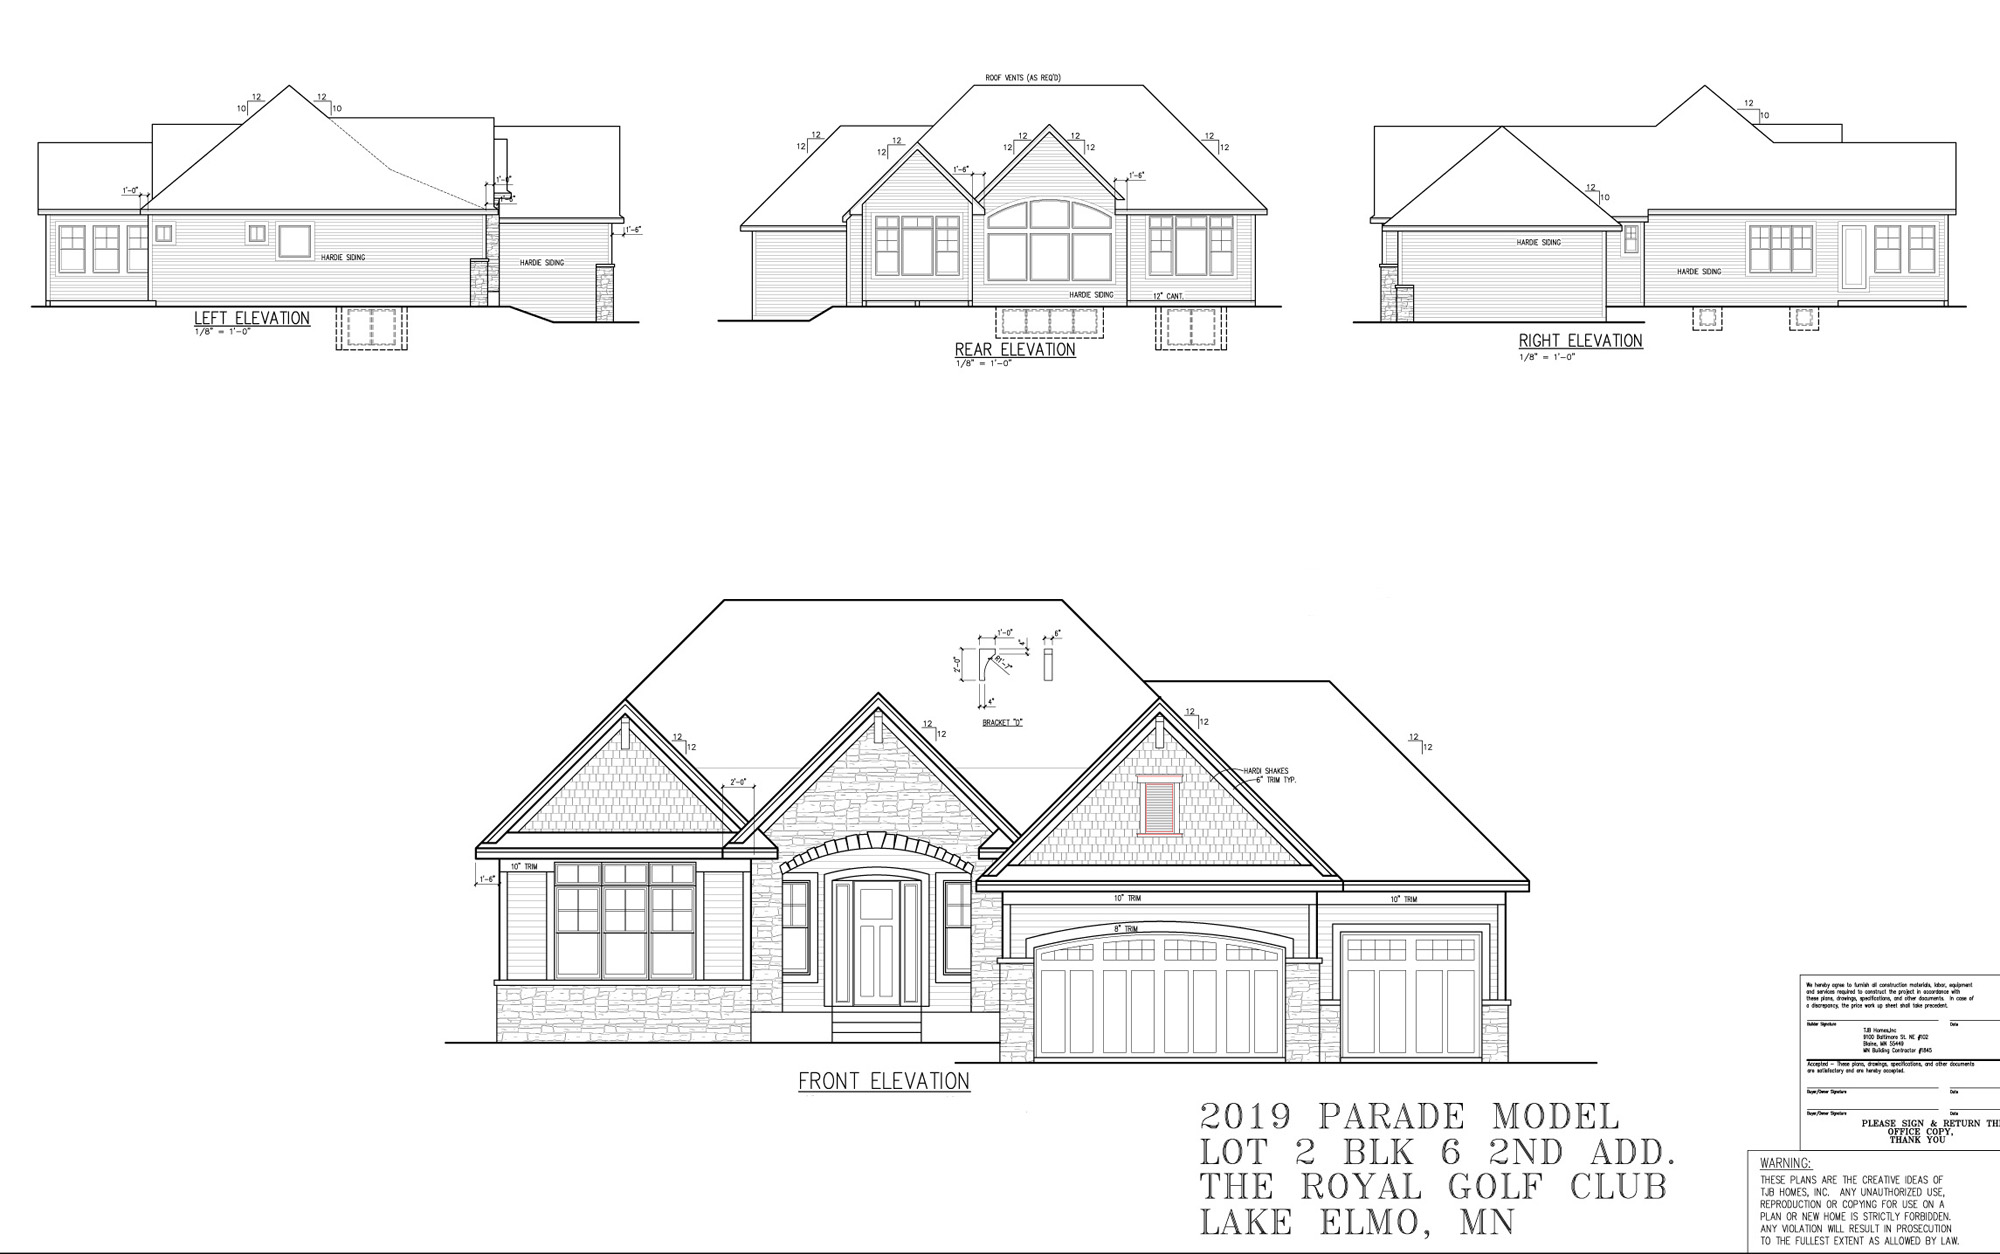 Home Plan Front, Rear and Side Elevation Plans